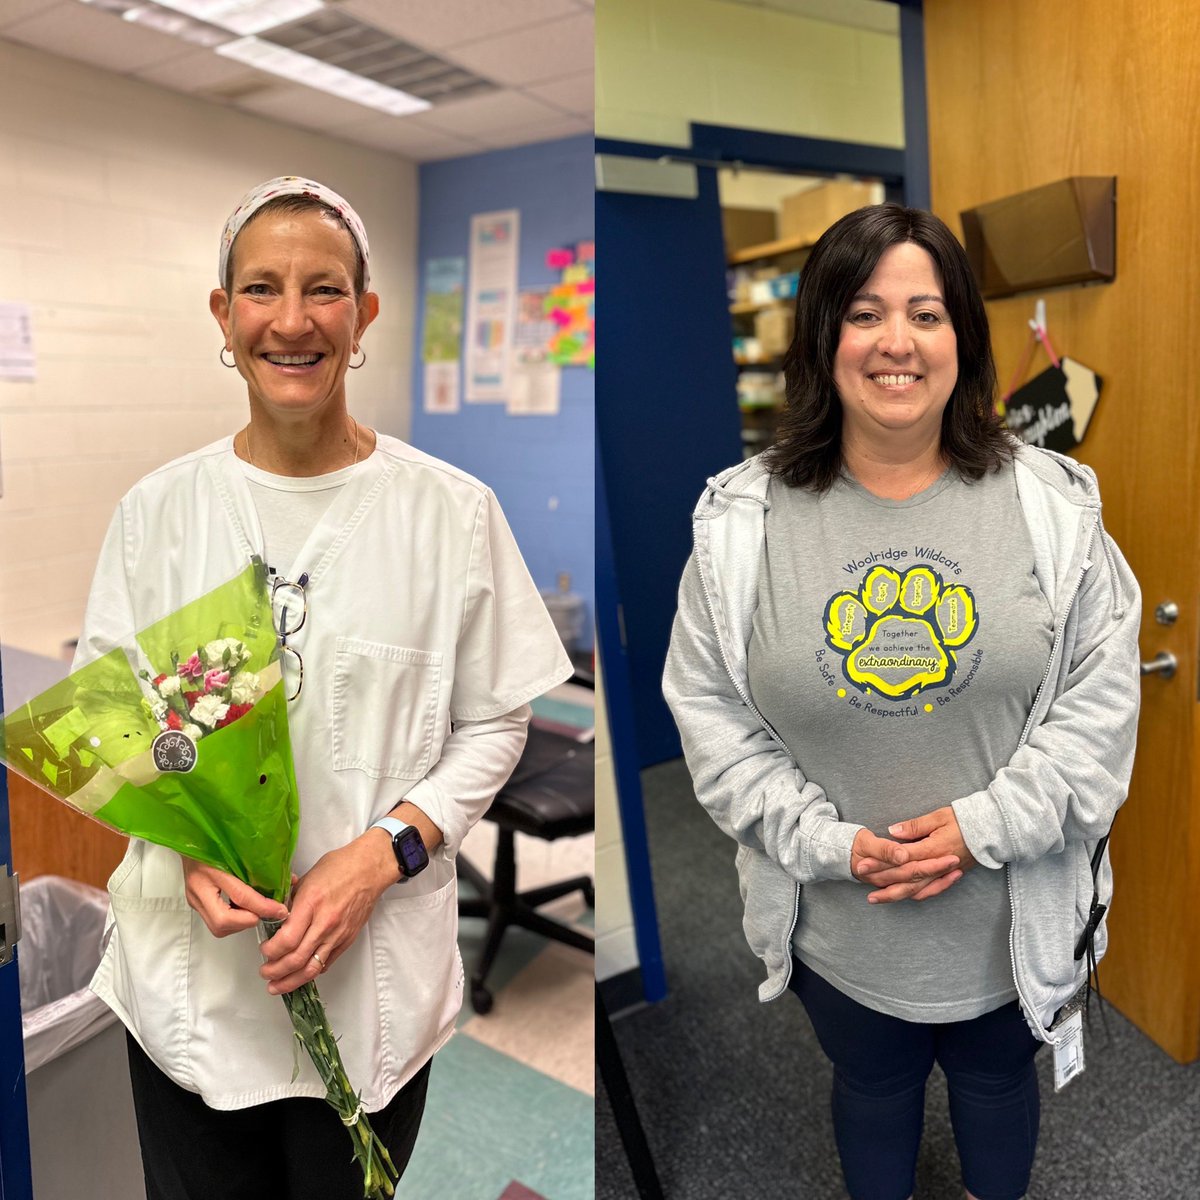 Happy School Nurse Day to our amazing nurse, Mrs. Meanor, and our clinic assistant, Mrs. Micco! We appreciate you each and every day! #schoolnursesrock 🐾💙💛🩺